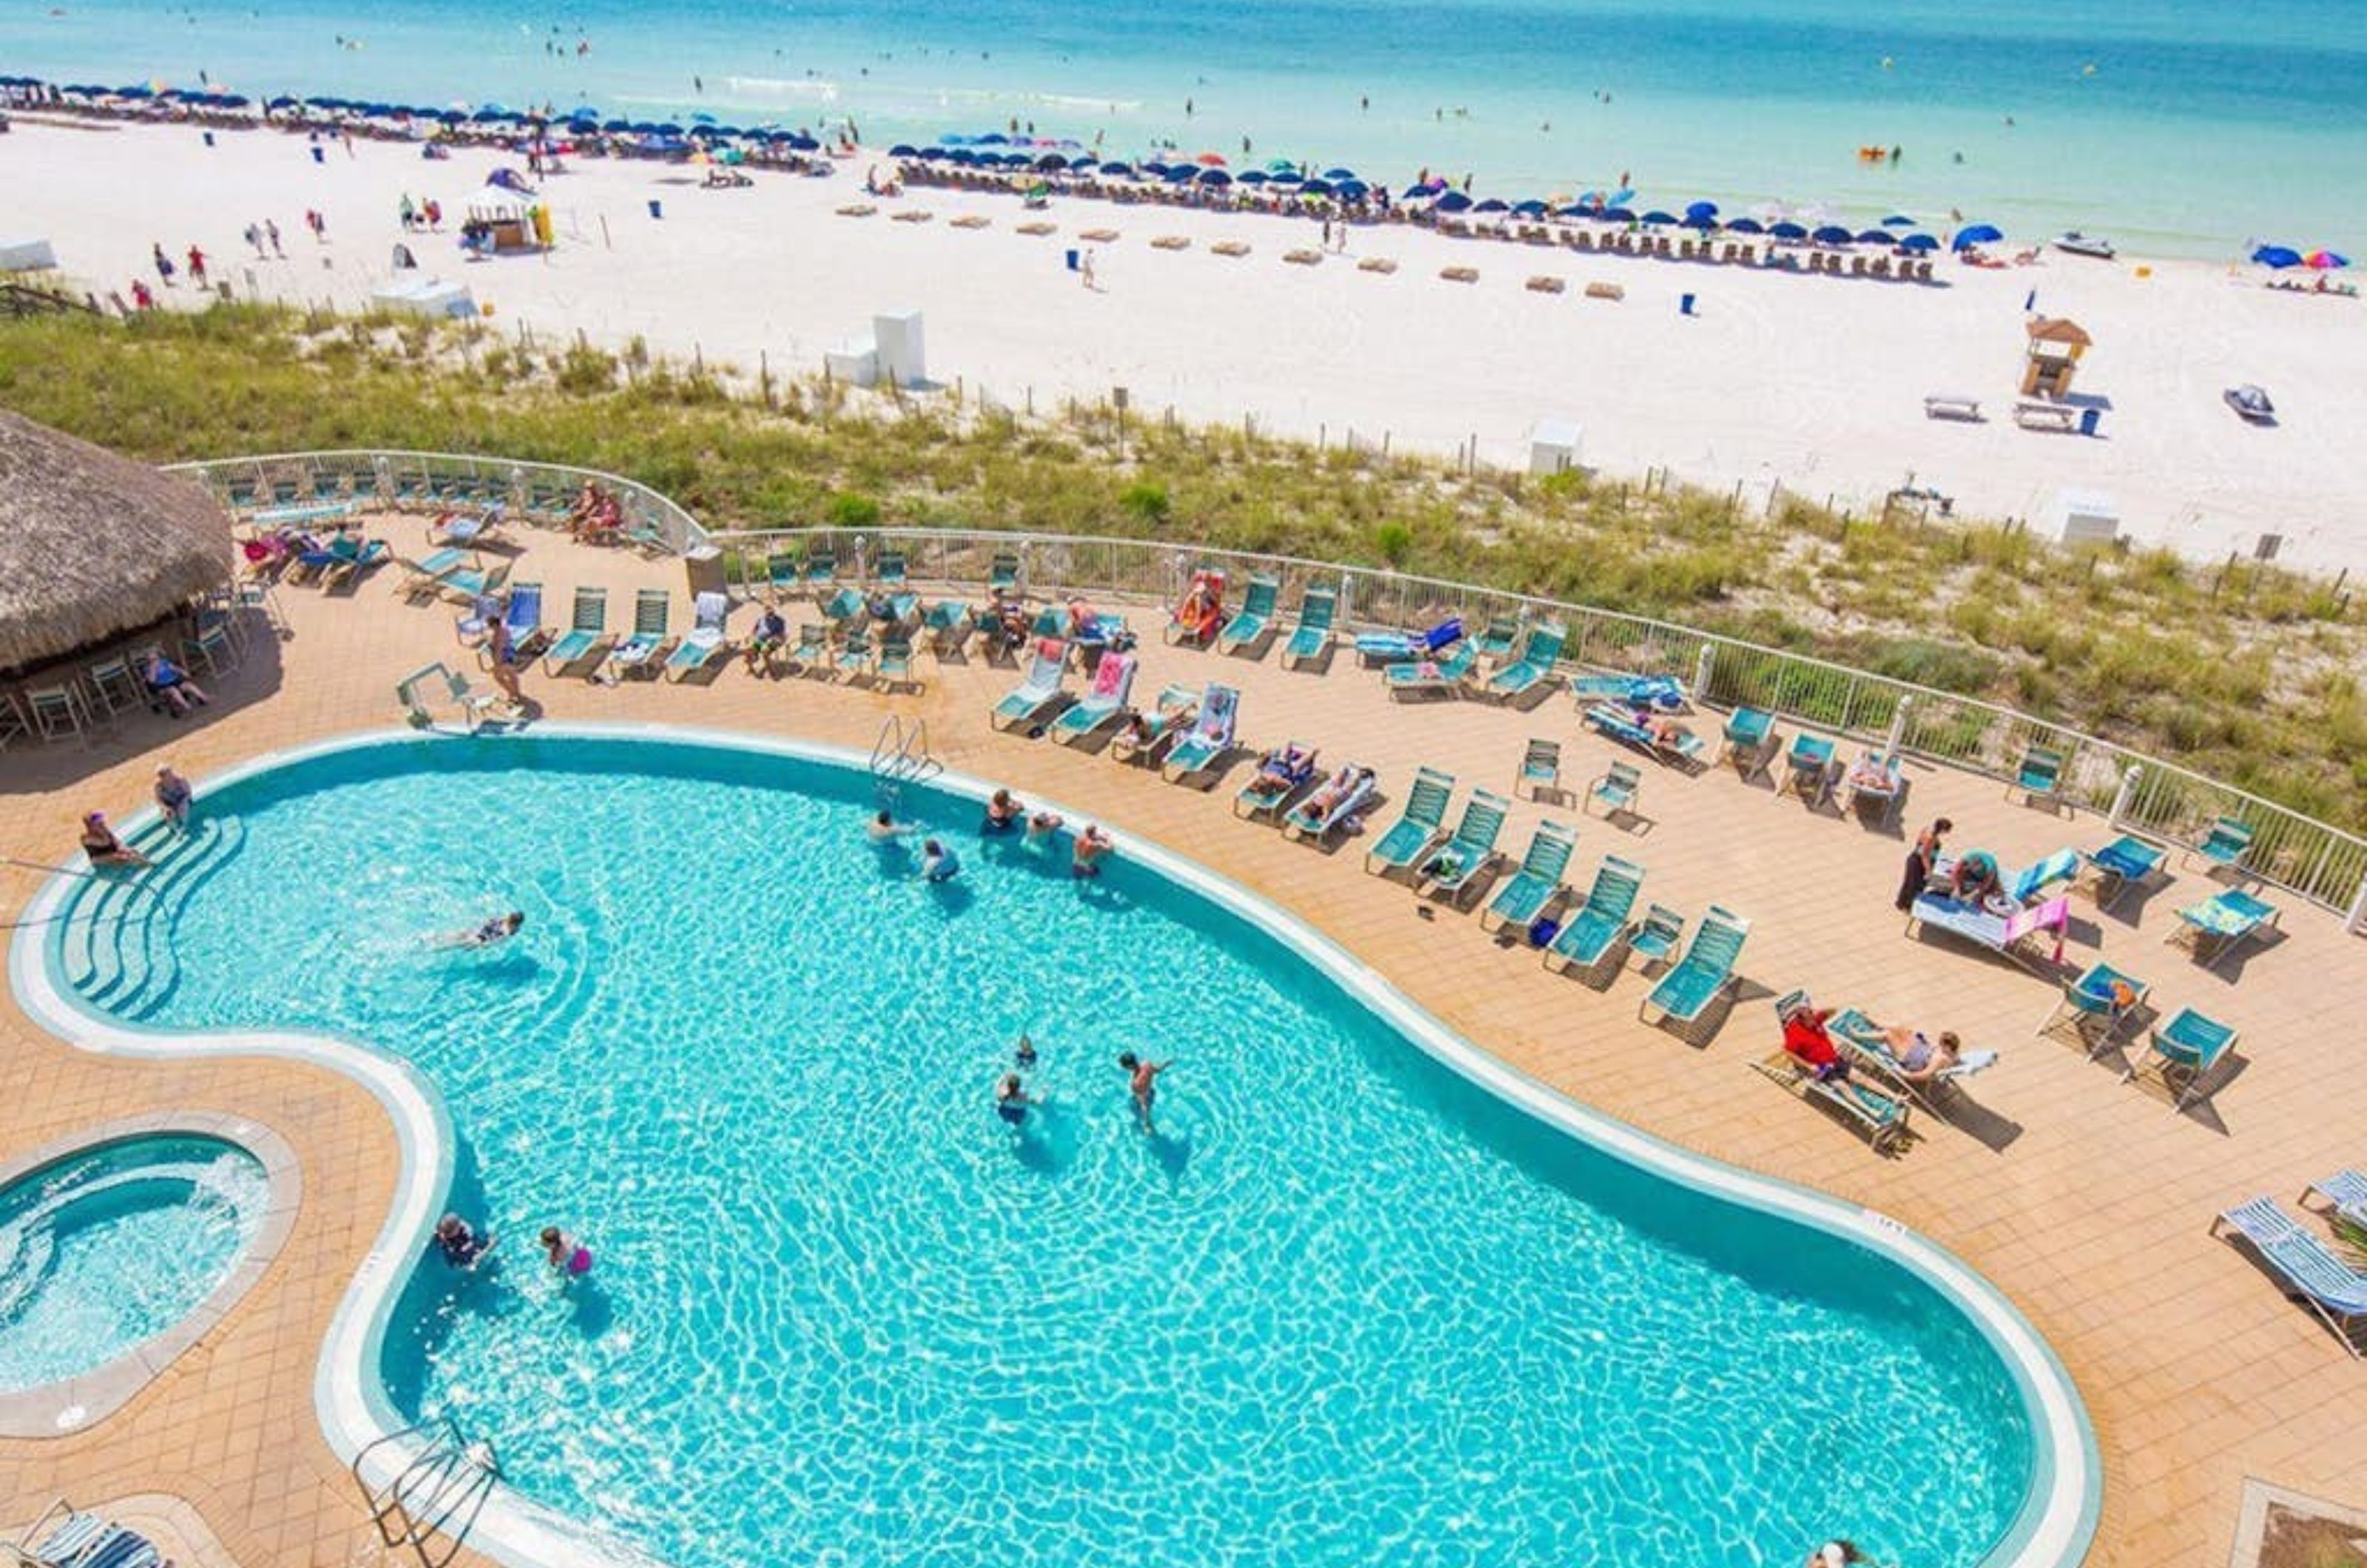 Aerial view of the outdoor pool next to the beach at Emerald Beach Resort in Panama City Beach Florida 